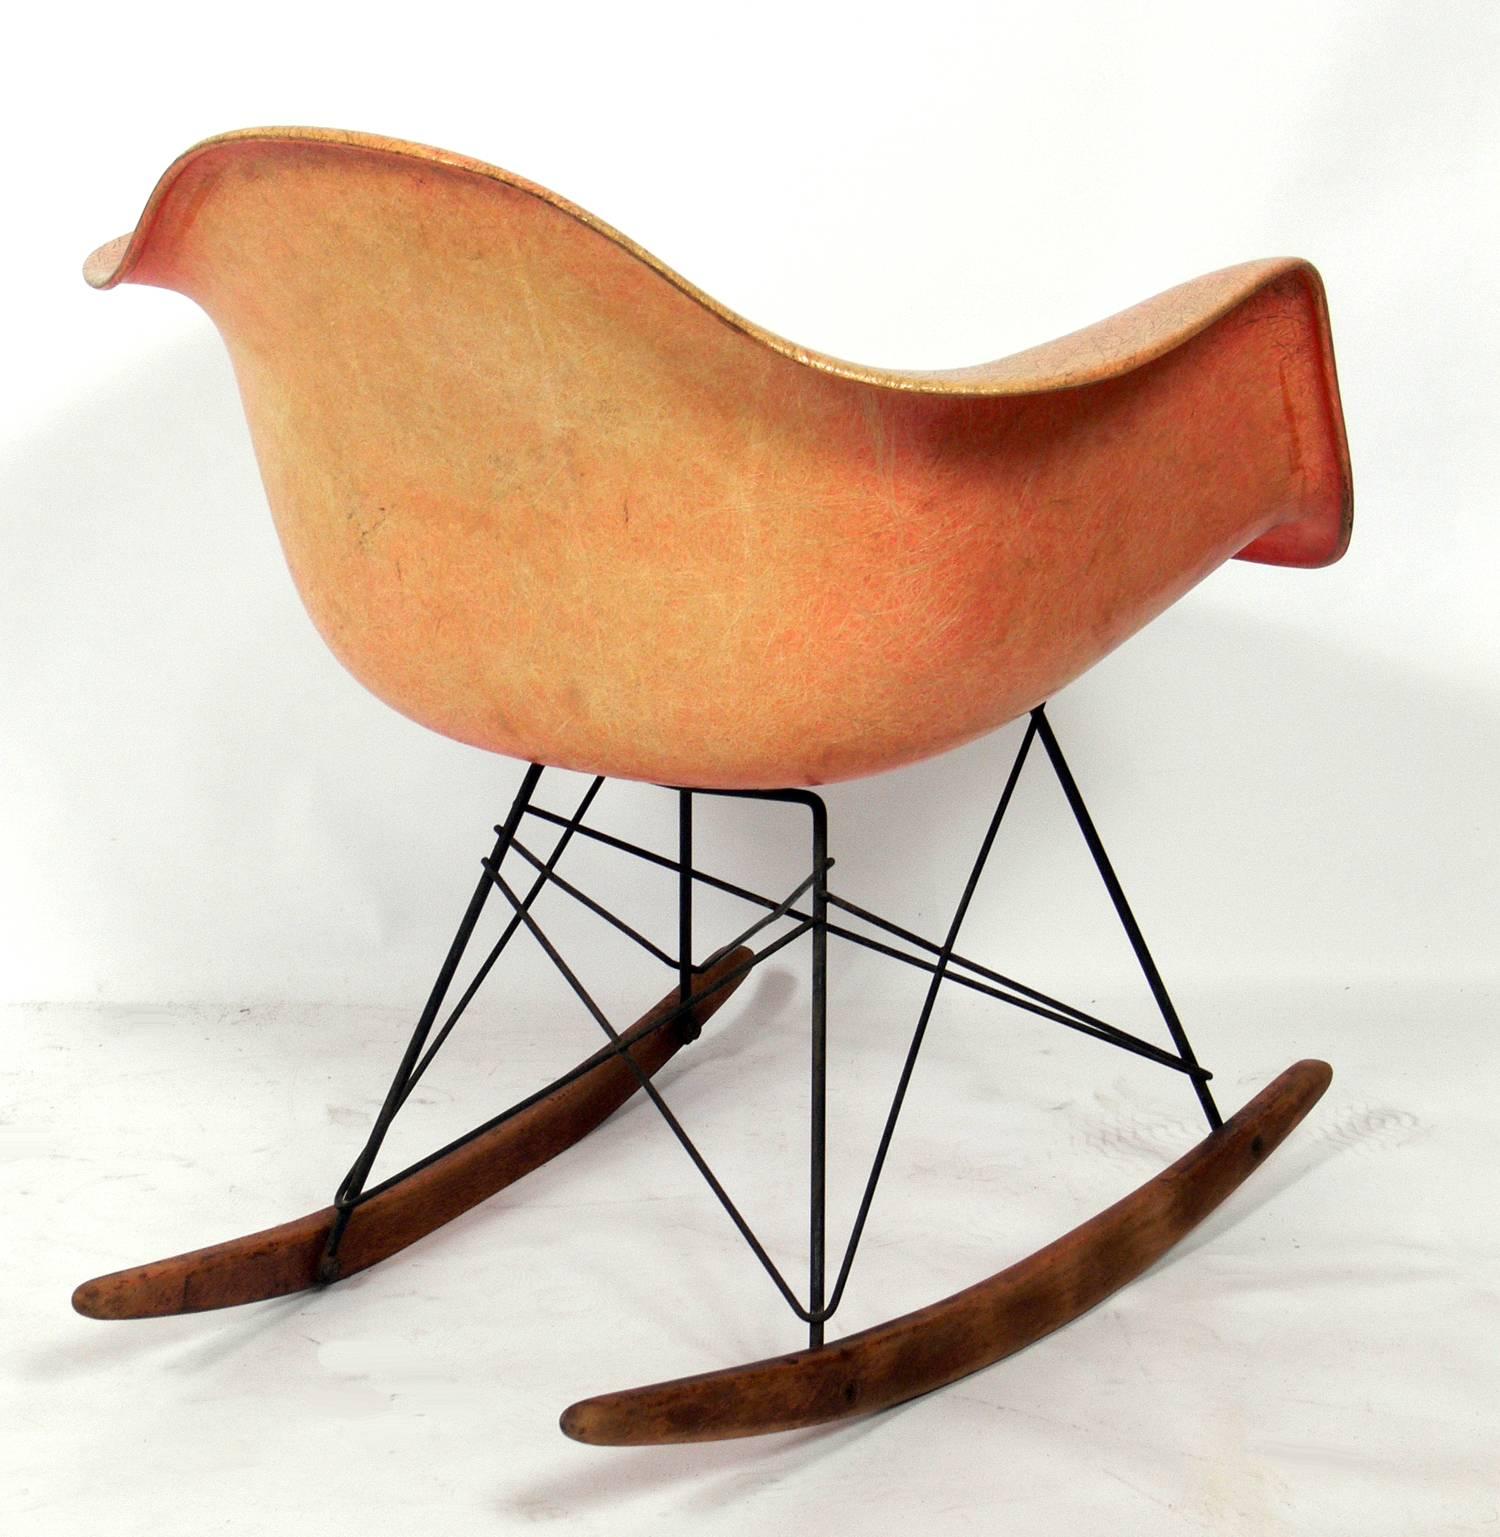 American Early All Original Zenith Rope Edge Rocker designed by Charles Eames